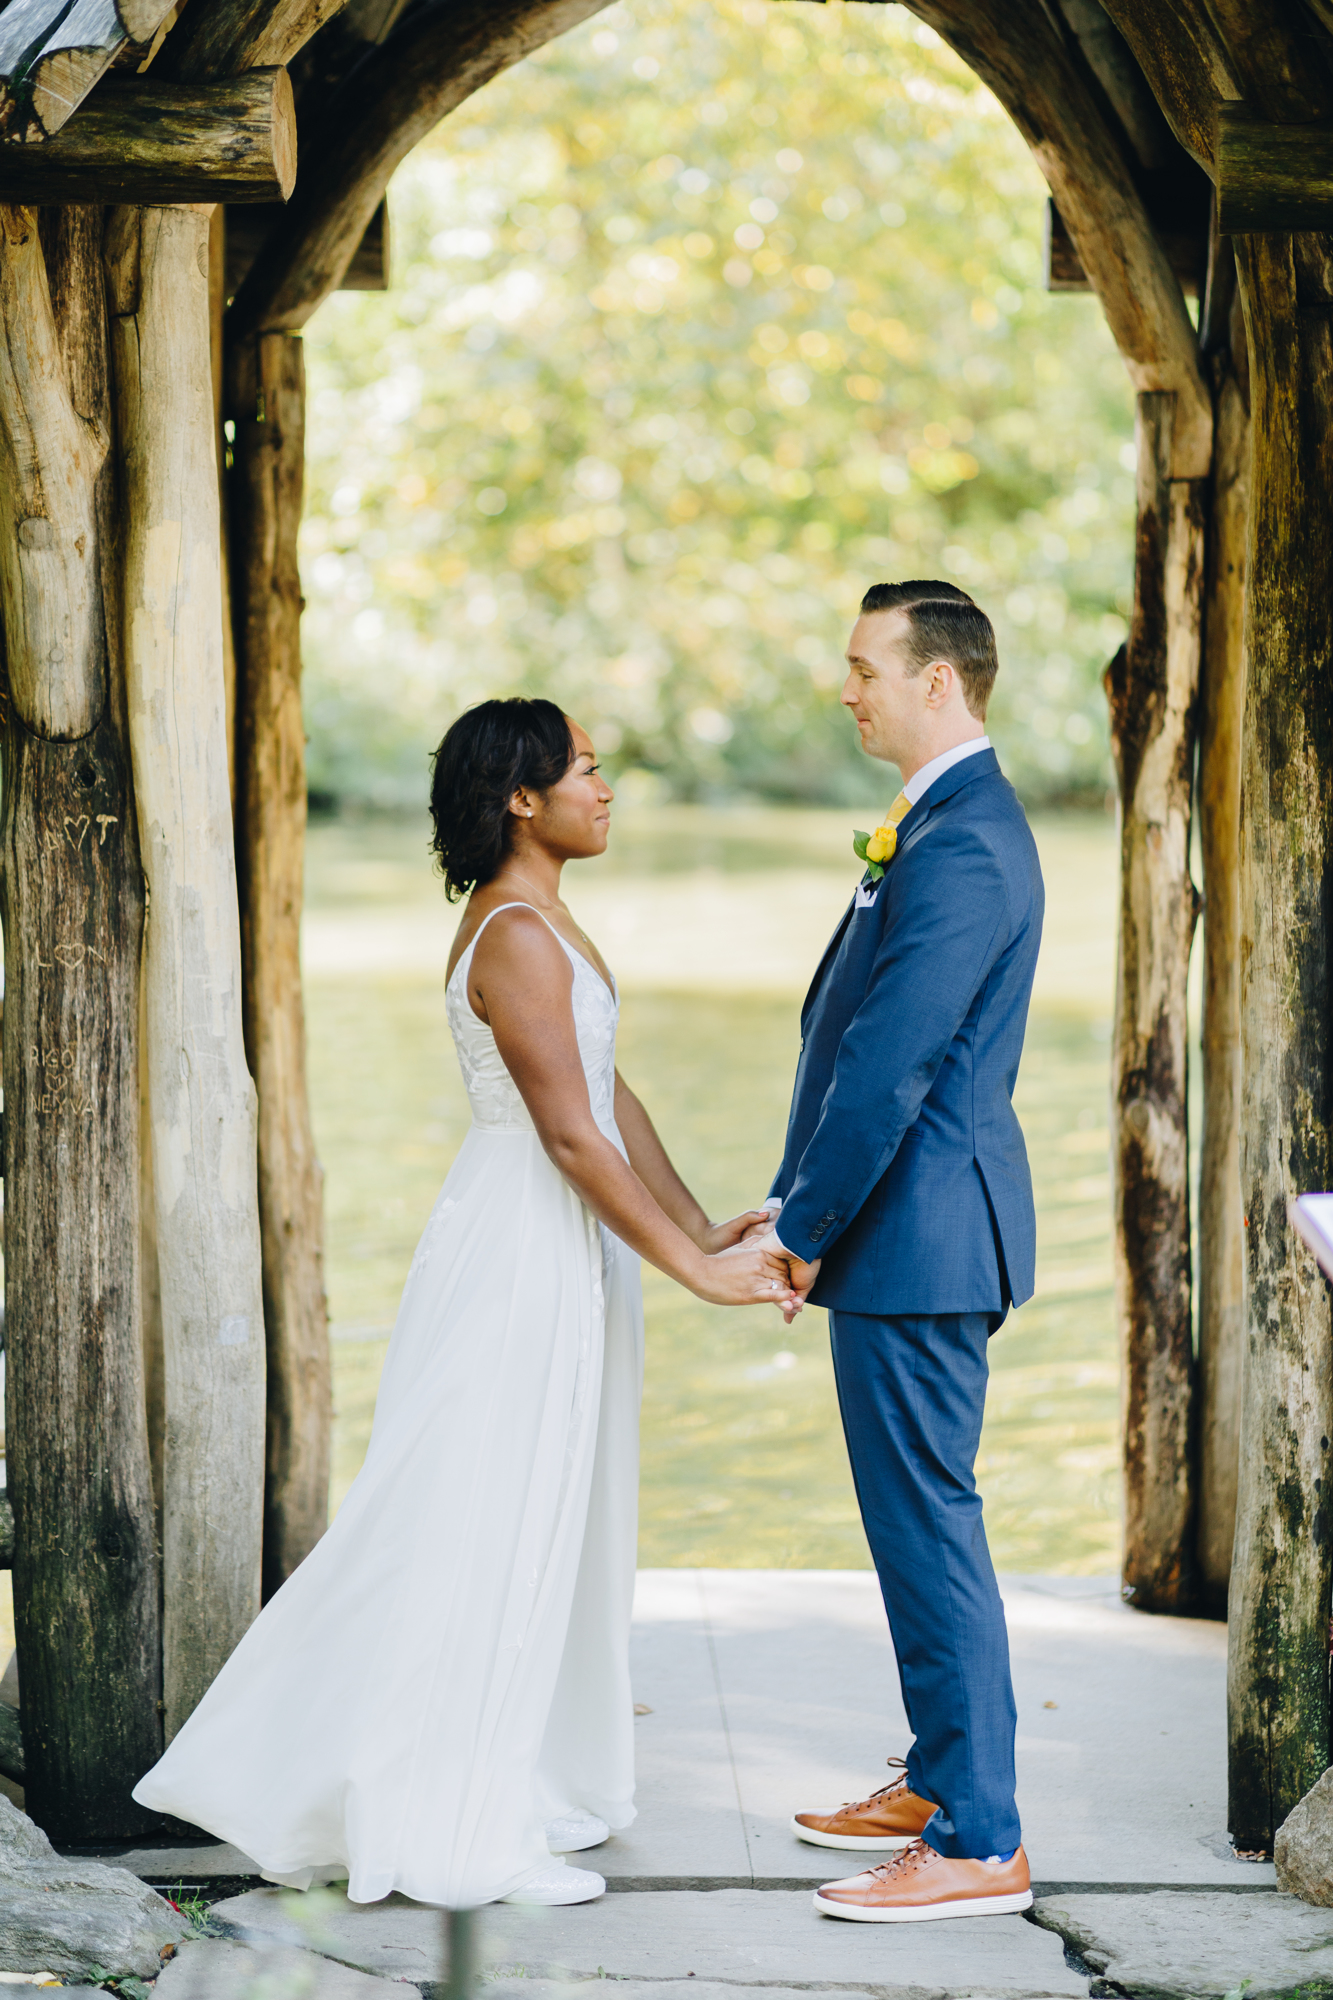 Small Wagner Cove Elopement in New York City's Beautiful Central Park